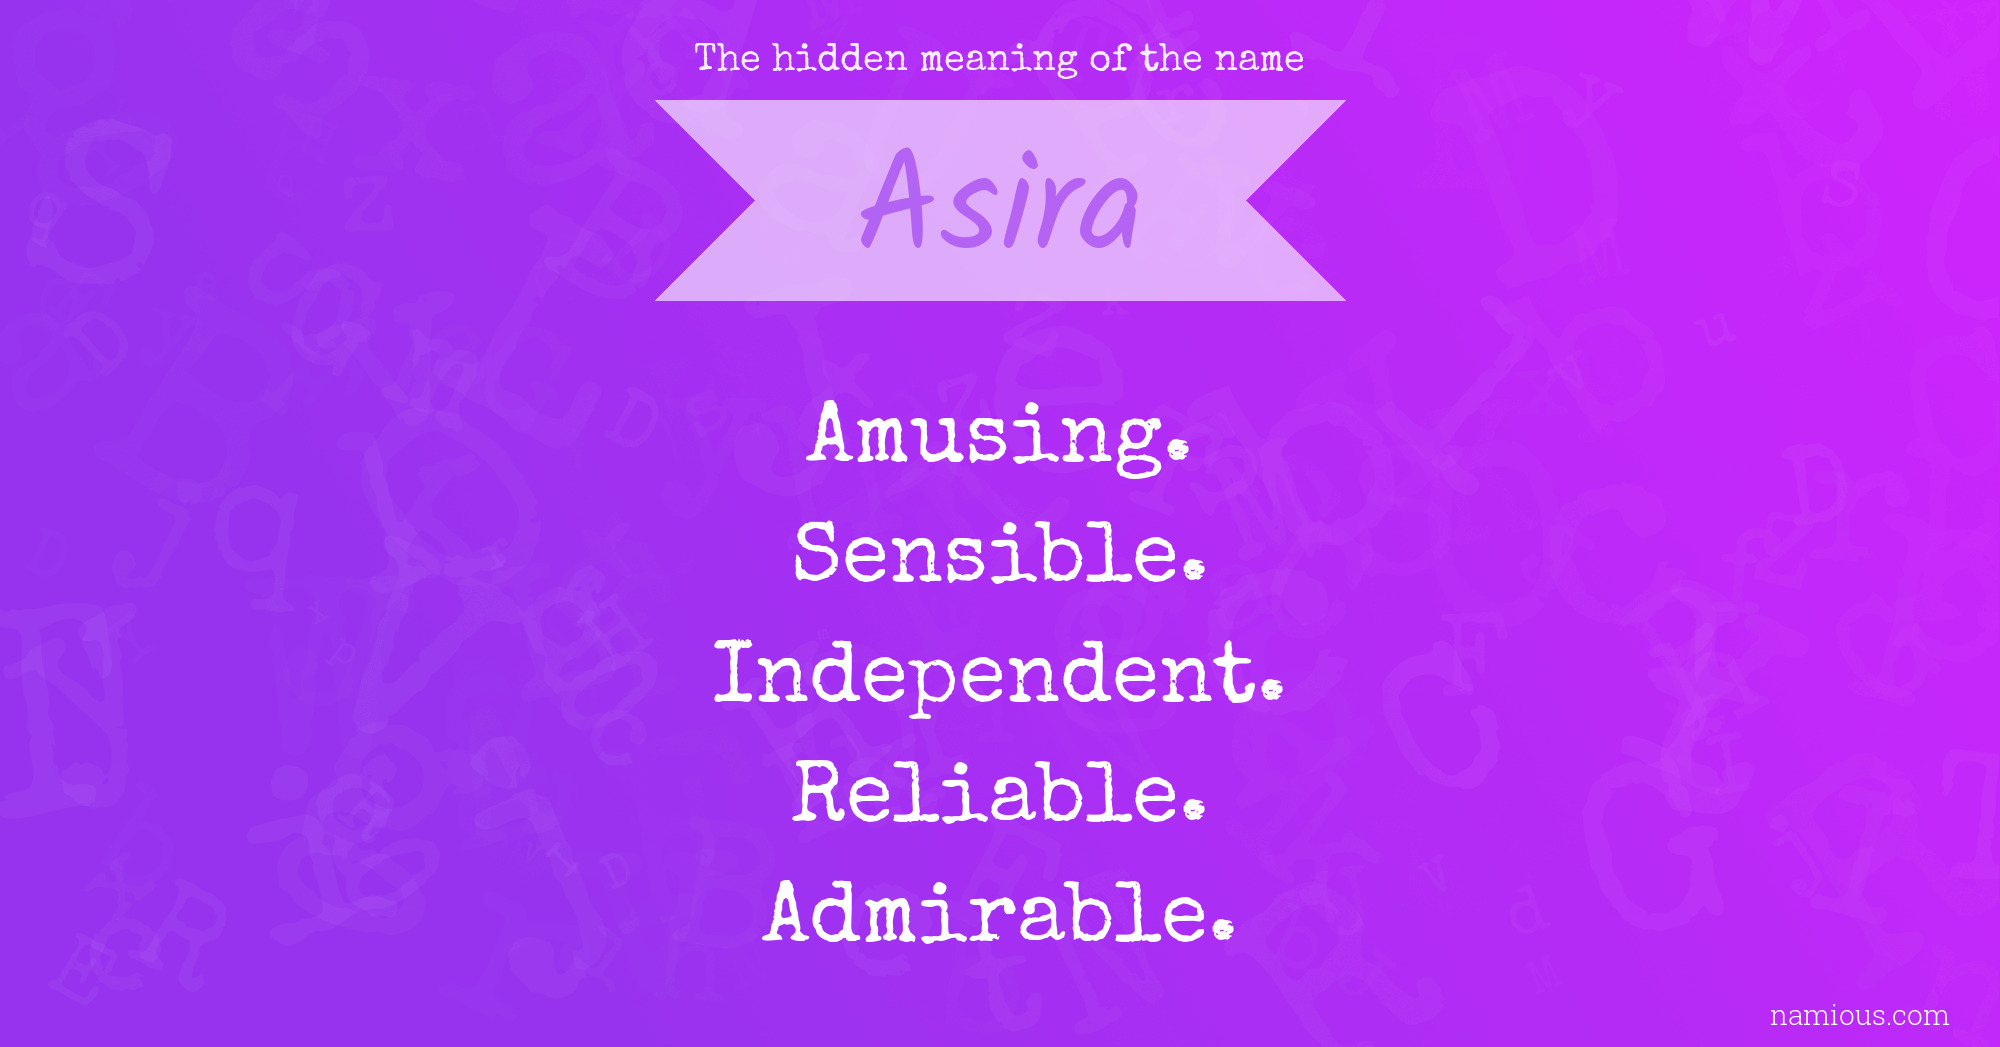 The hidden meaning of the name Asira